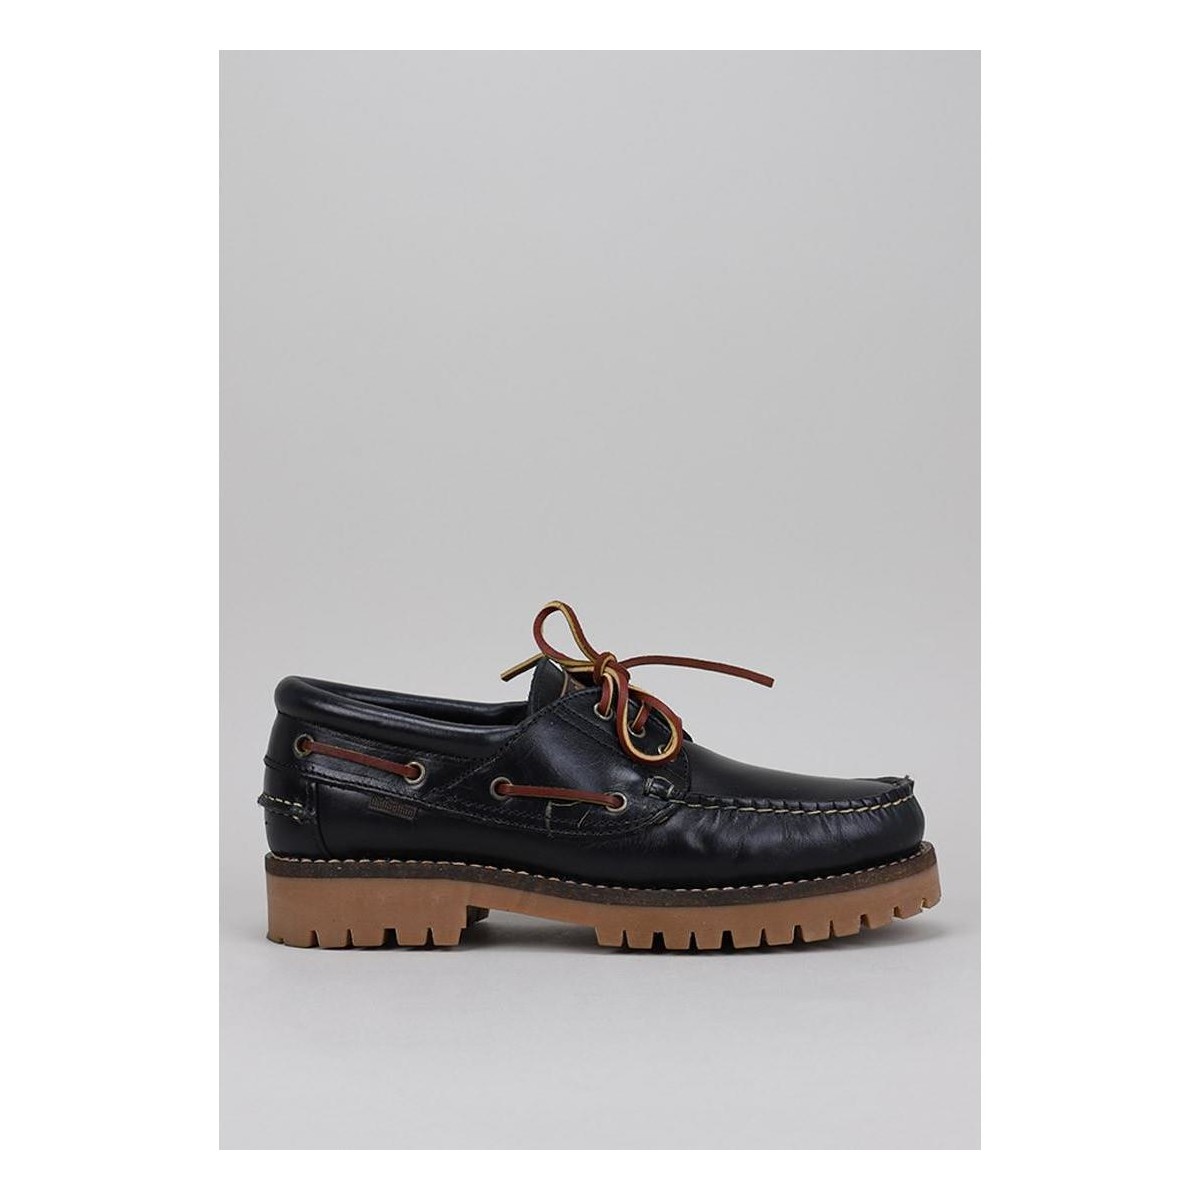 Boat shoes CallagHan 21910